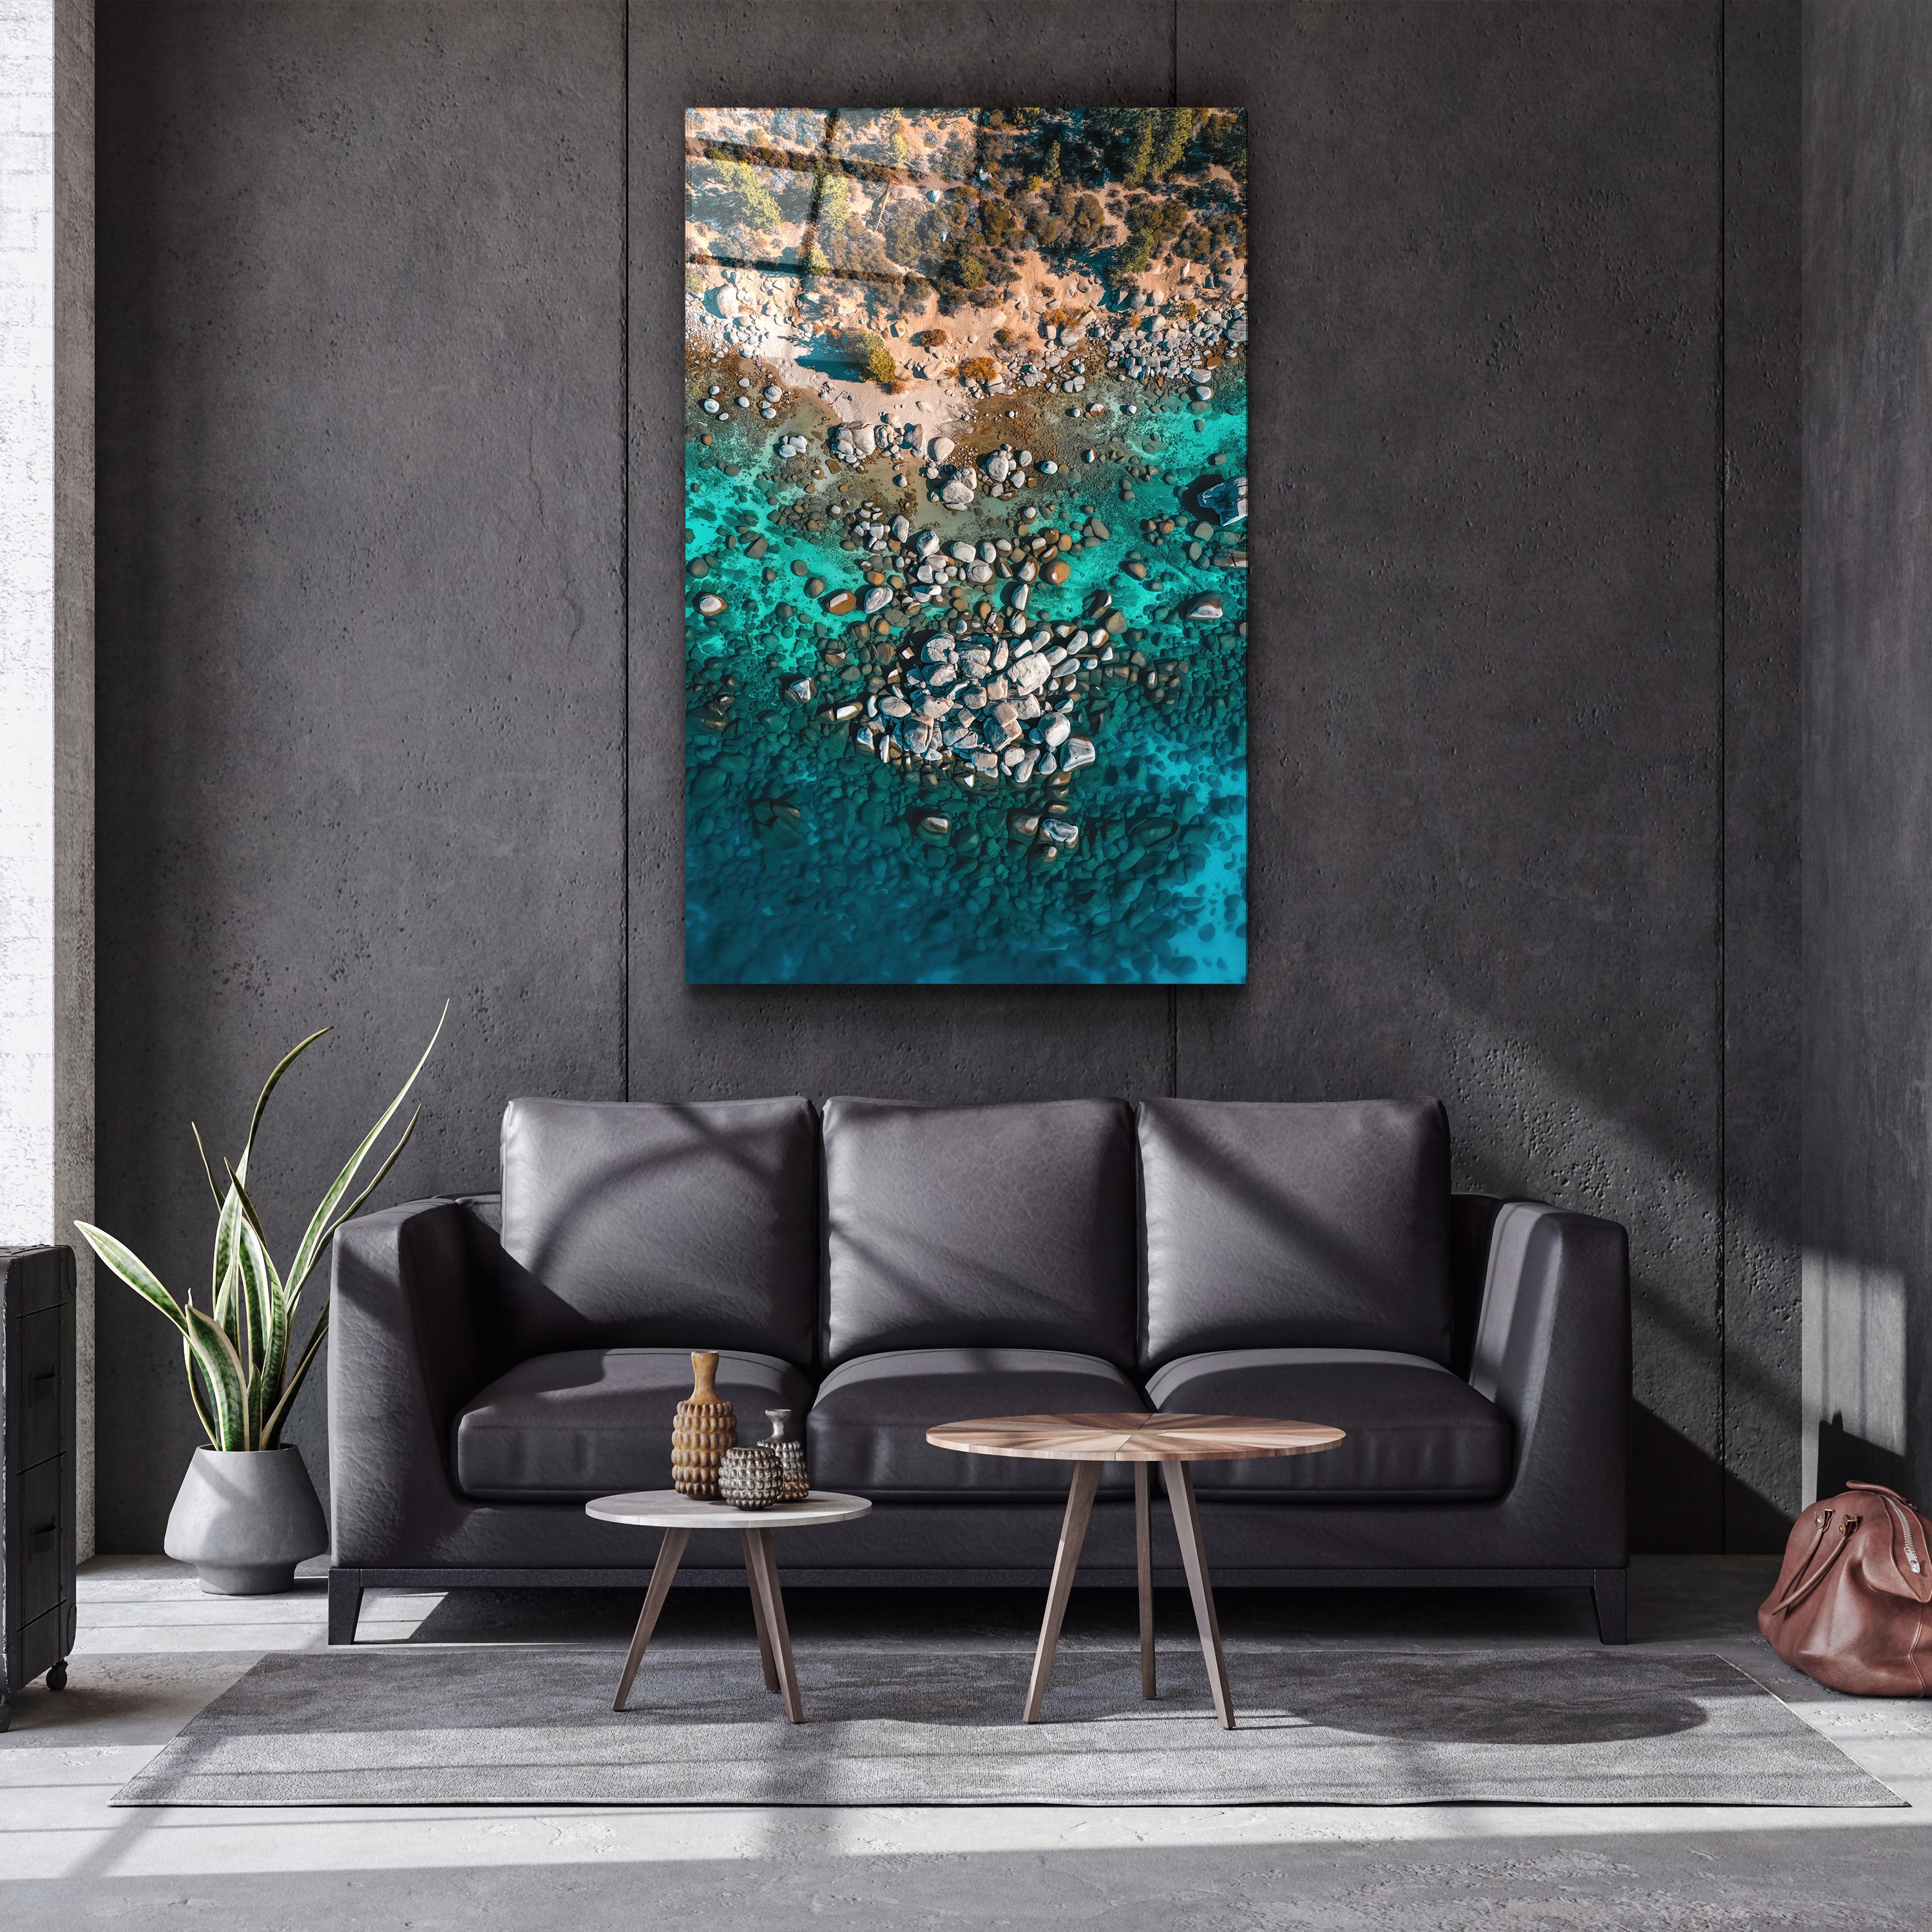 ・"A beautifully tranquil day at Lake Tahoe, CA"・Glass Wall Art